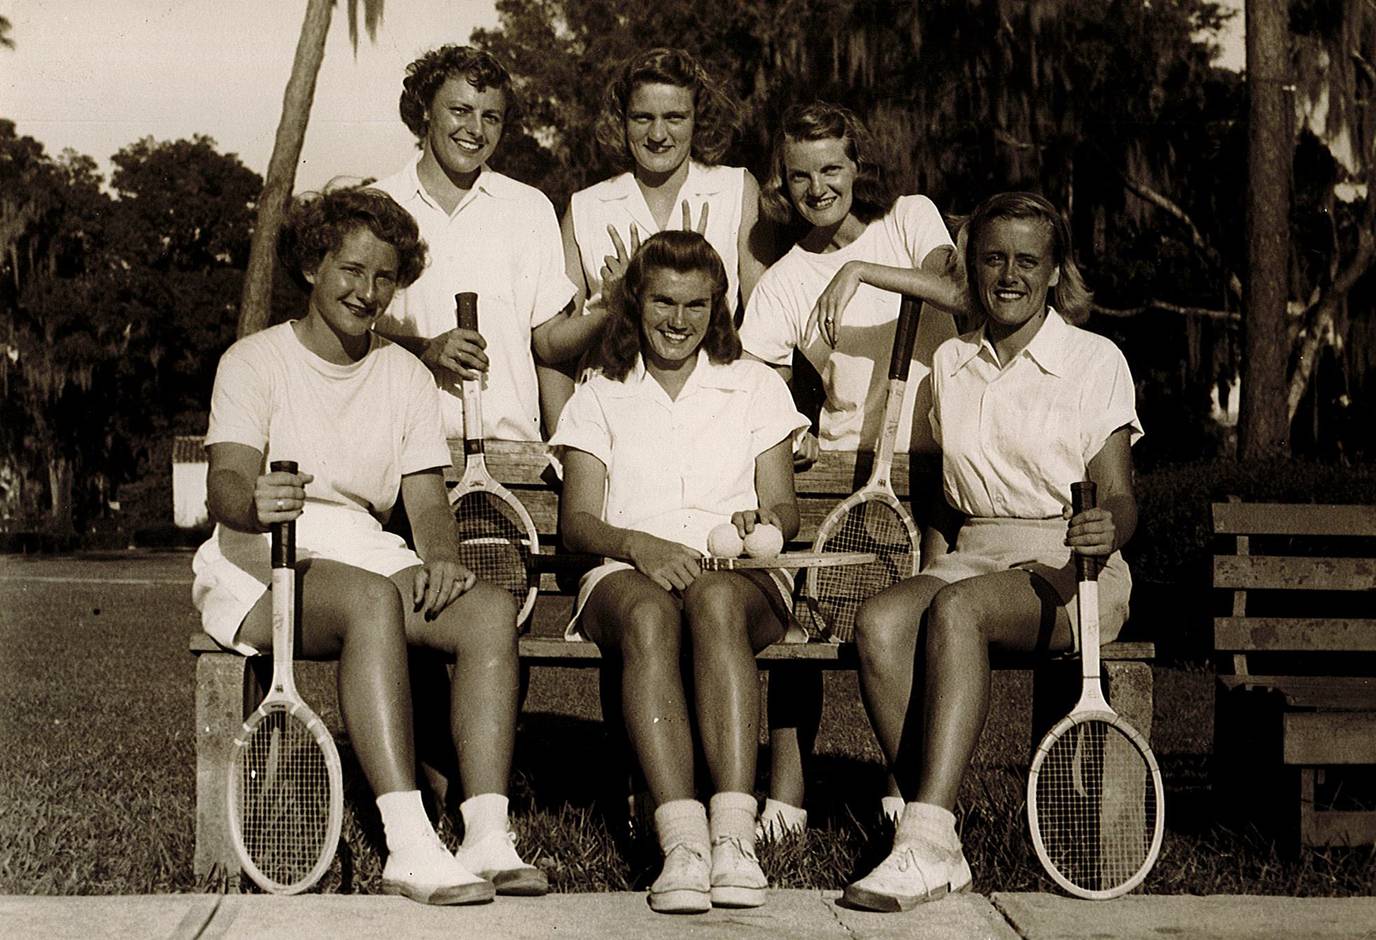 Rollins women’s tennis team in the 1940s, including Shirley Fry Irvin ’49